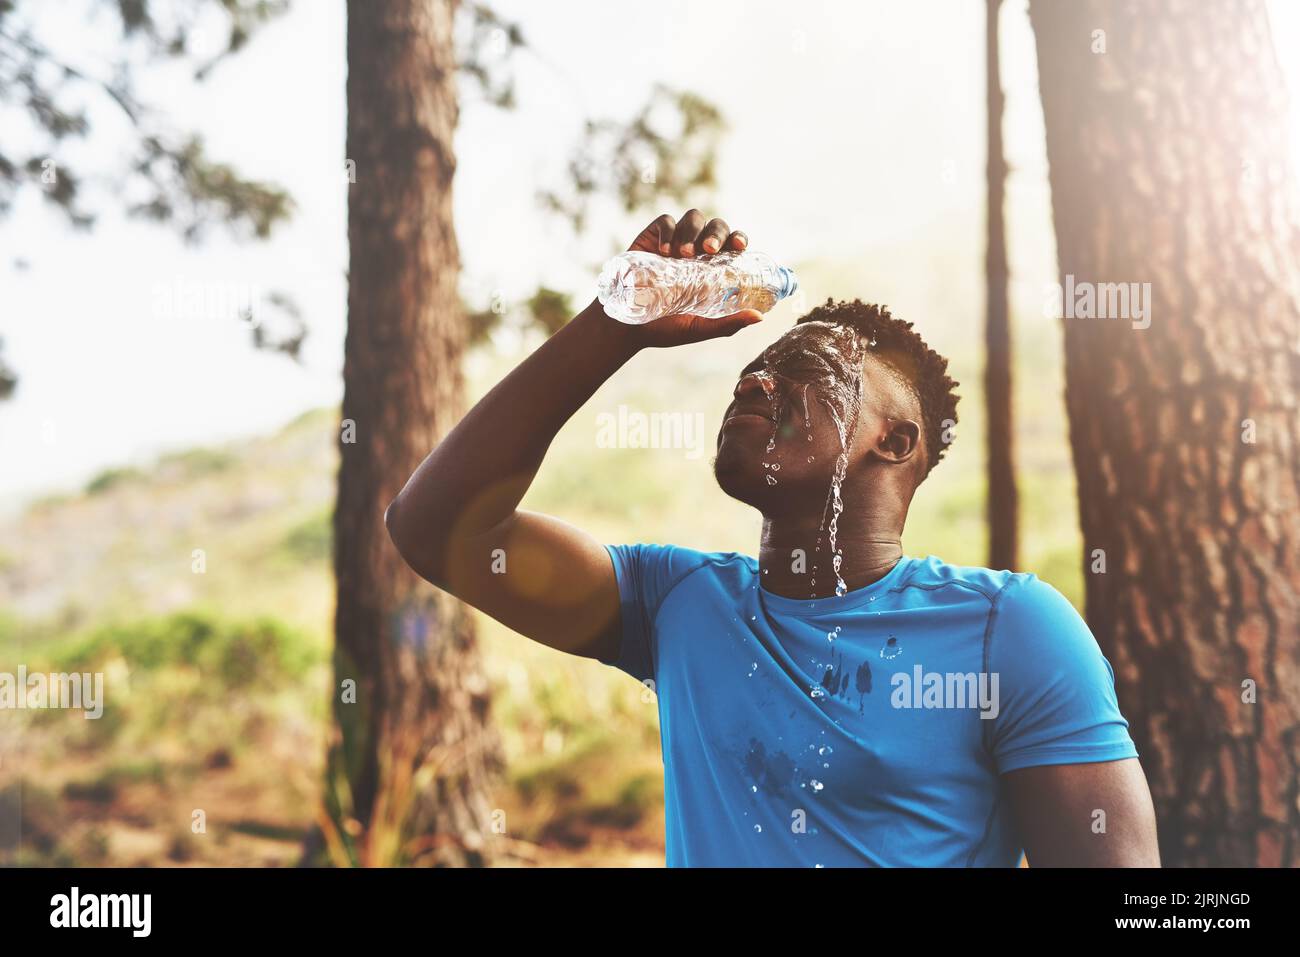 Cooling down after an intense workout. a sporty young man pouring water over his face while out for a run in the forest. Stock Photo